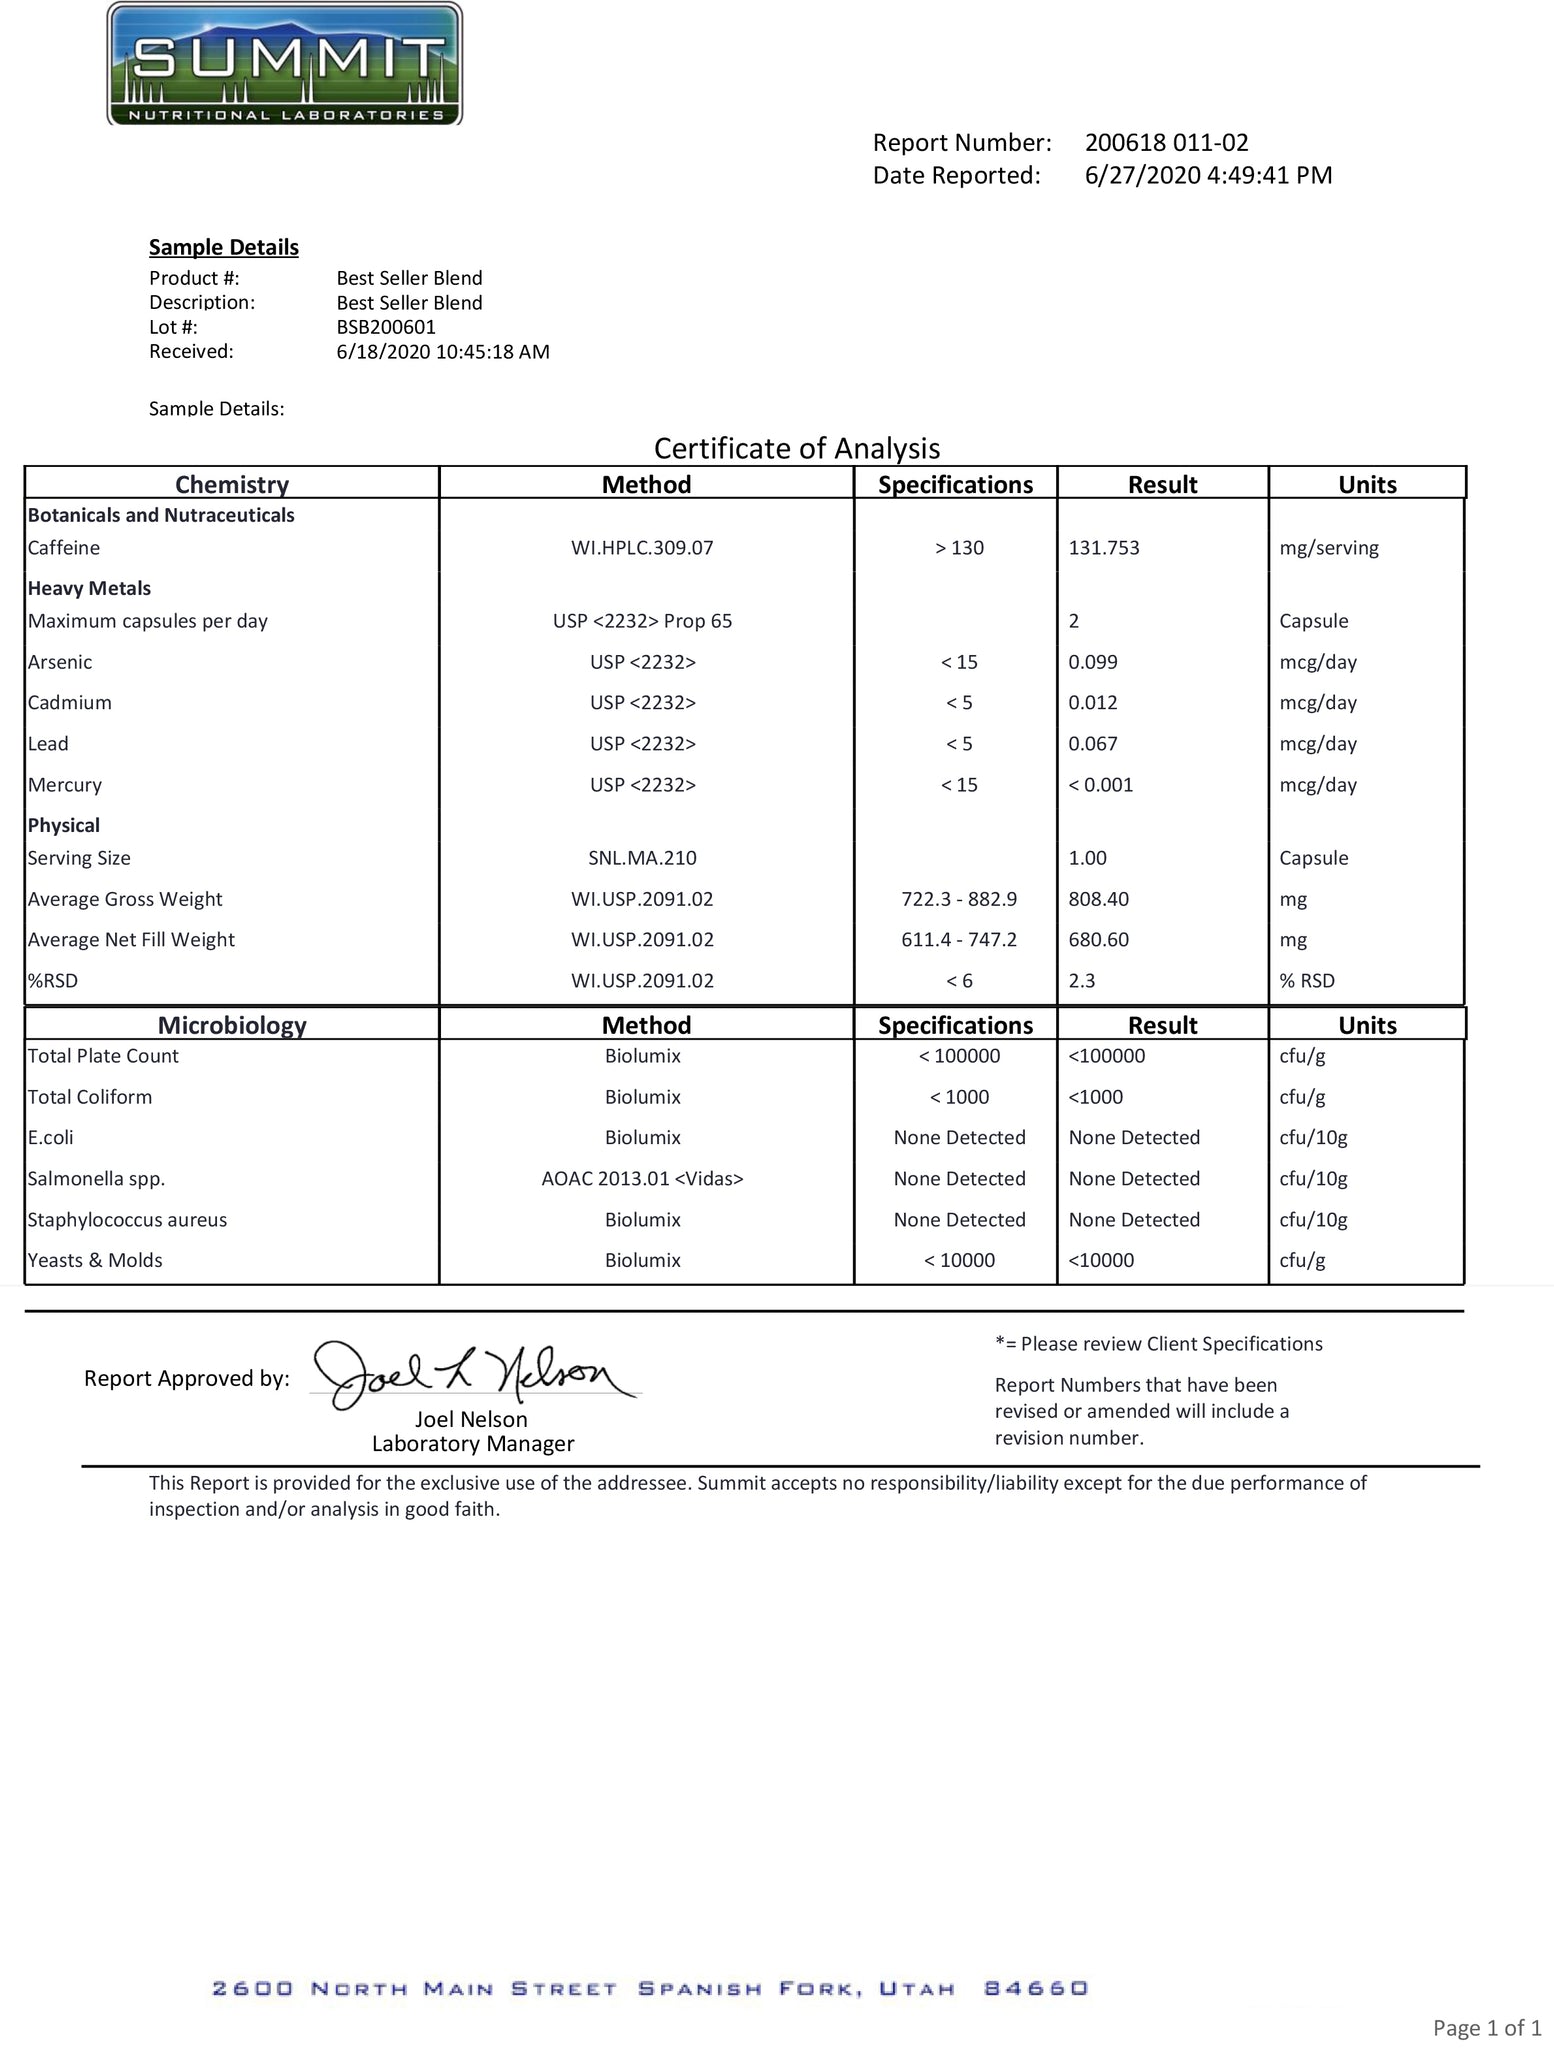 Lab Report for Fitness Advance of Green